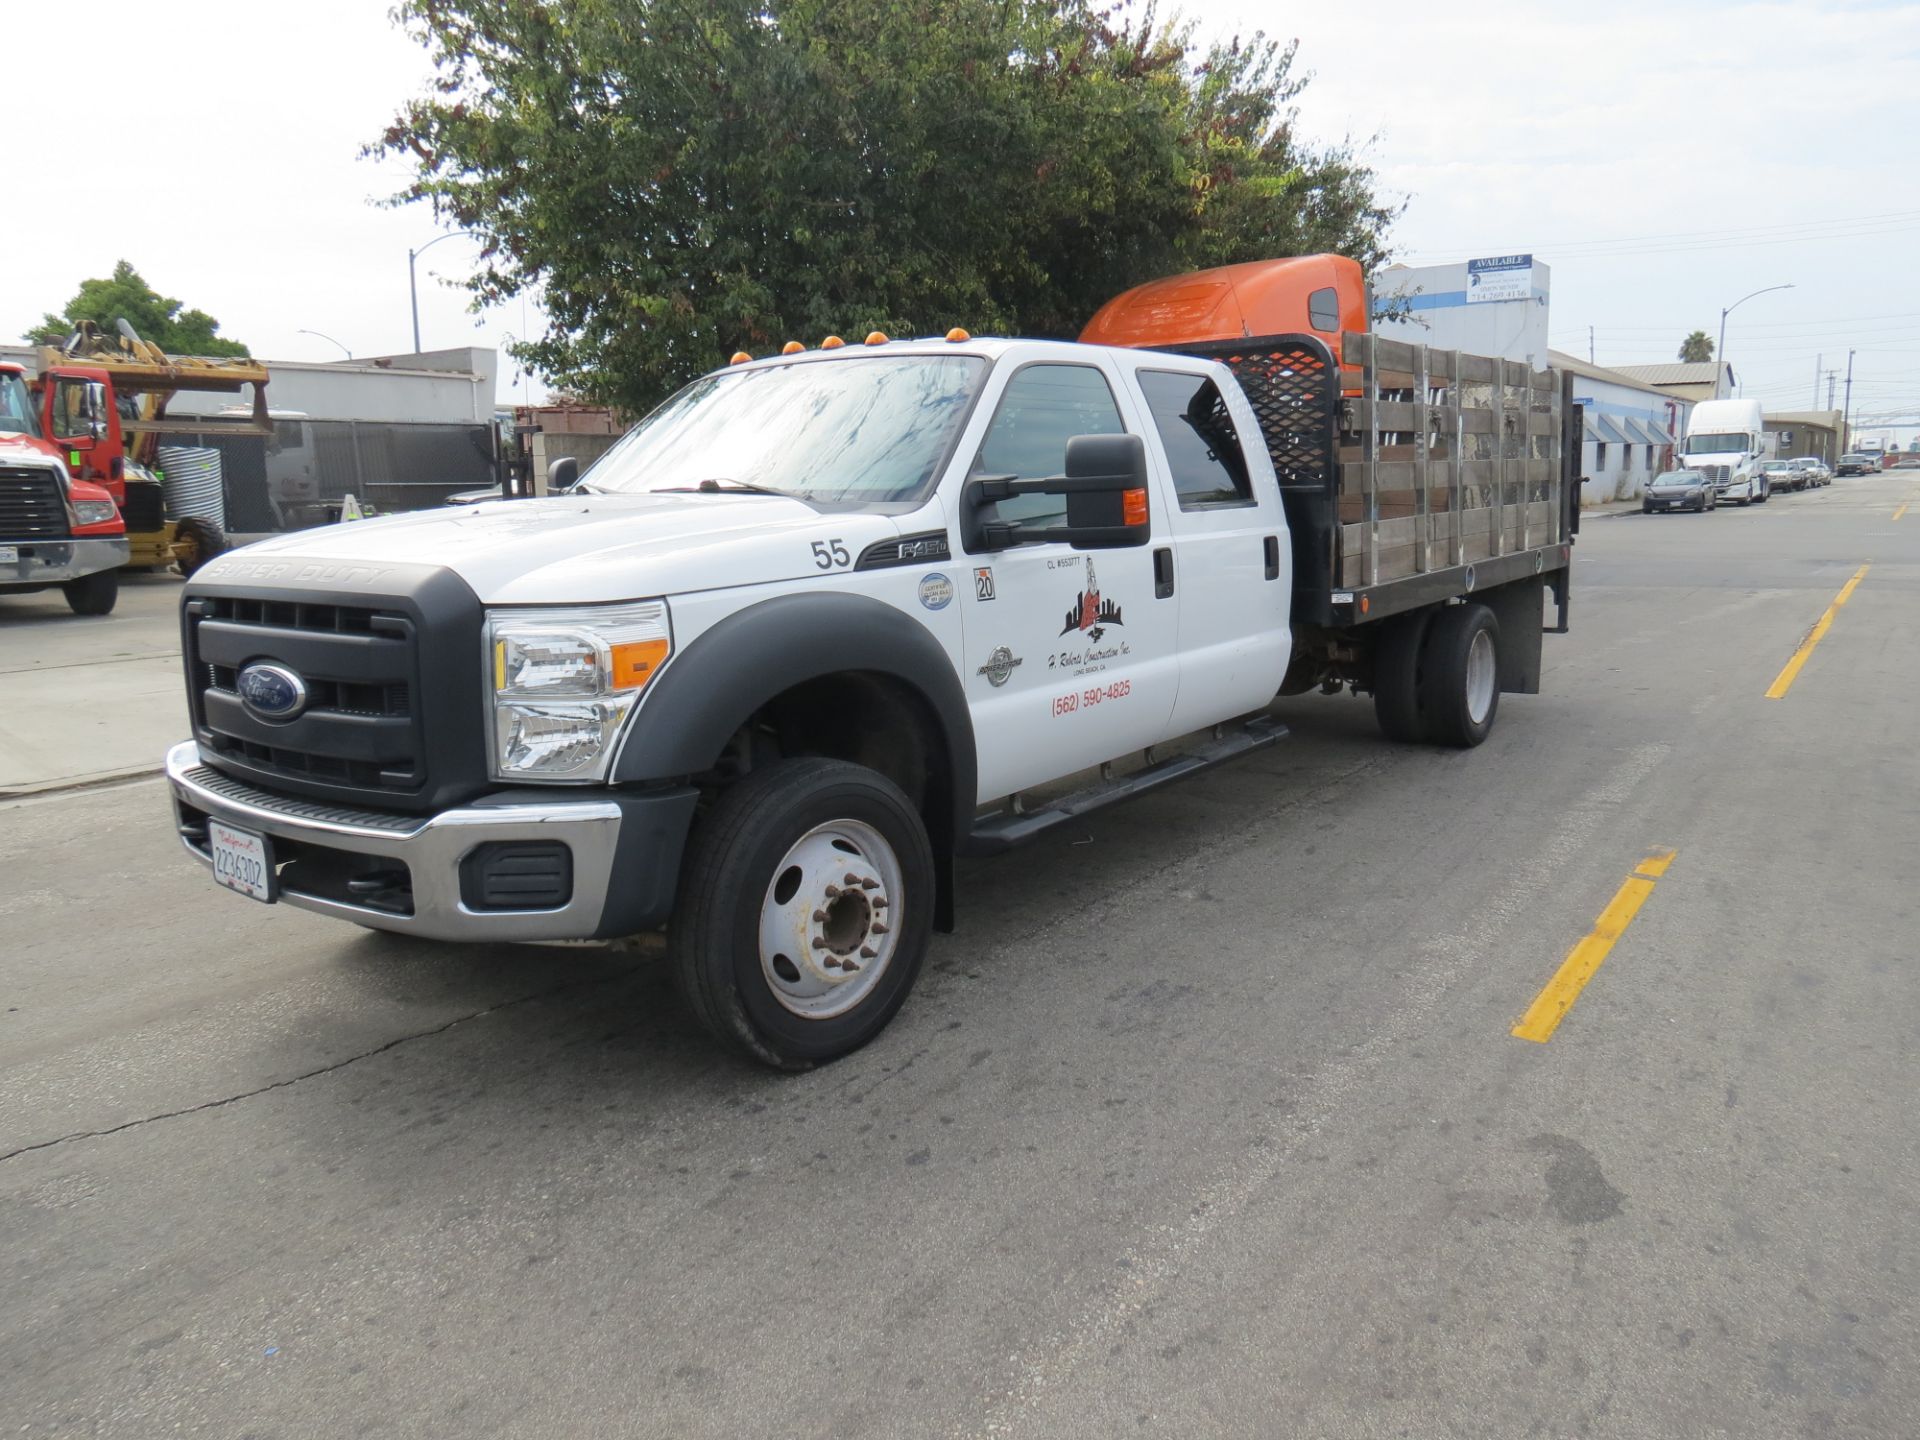 2015 Ford F-450 SUPER DUTY STAKE BED TRUCK, WITH LIFT GATE, SUPER CREW CAB , 6.7 POWER STROKE DIESEL